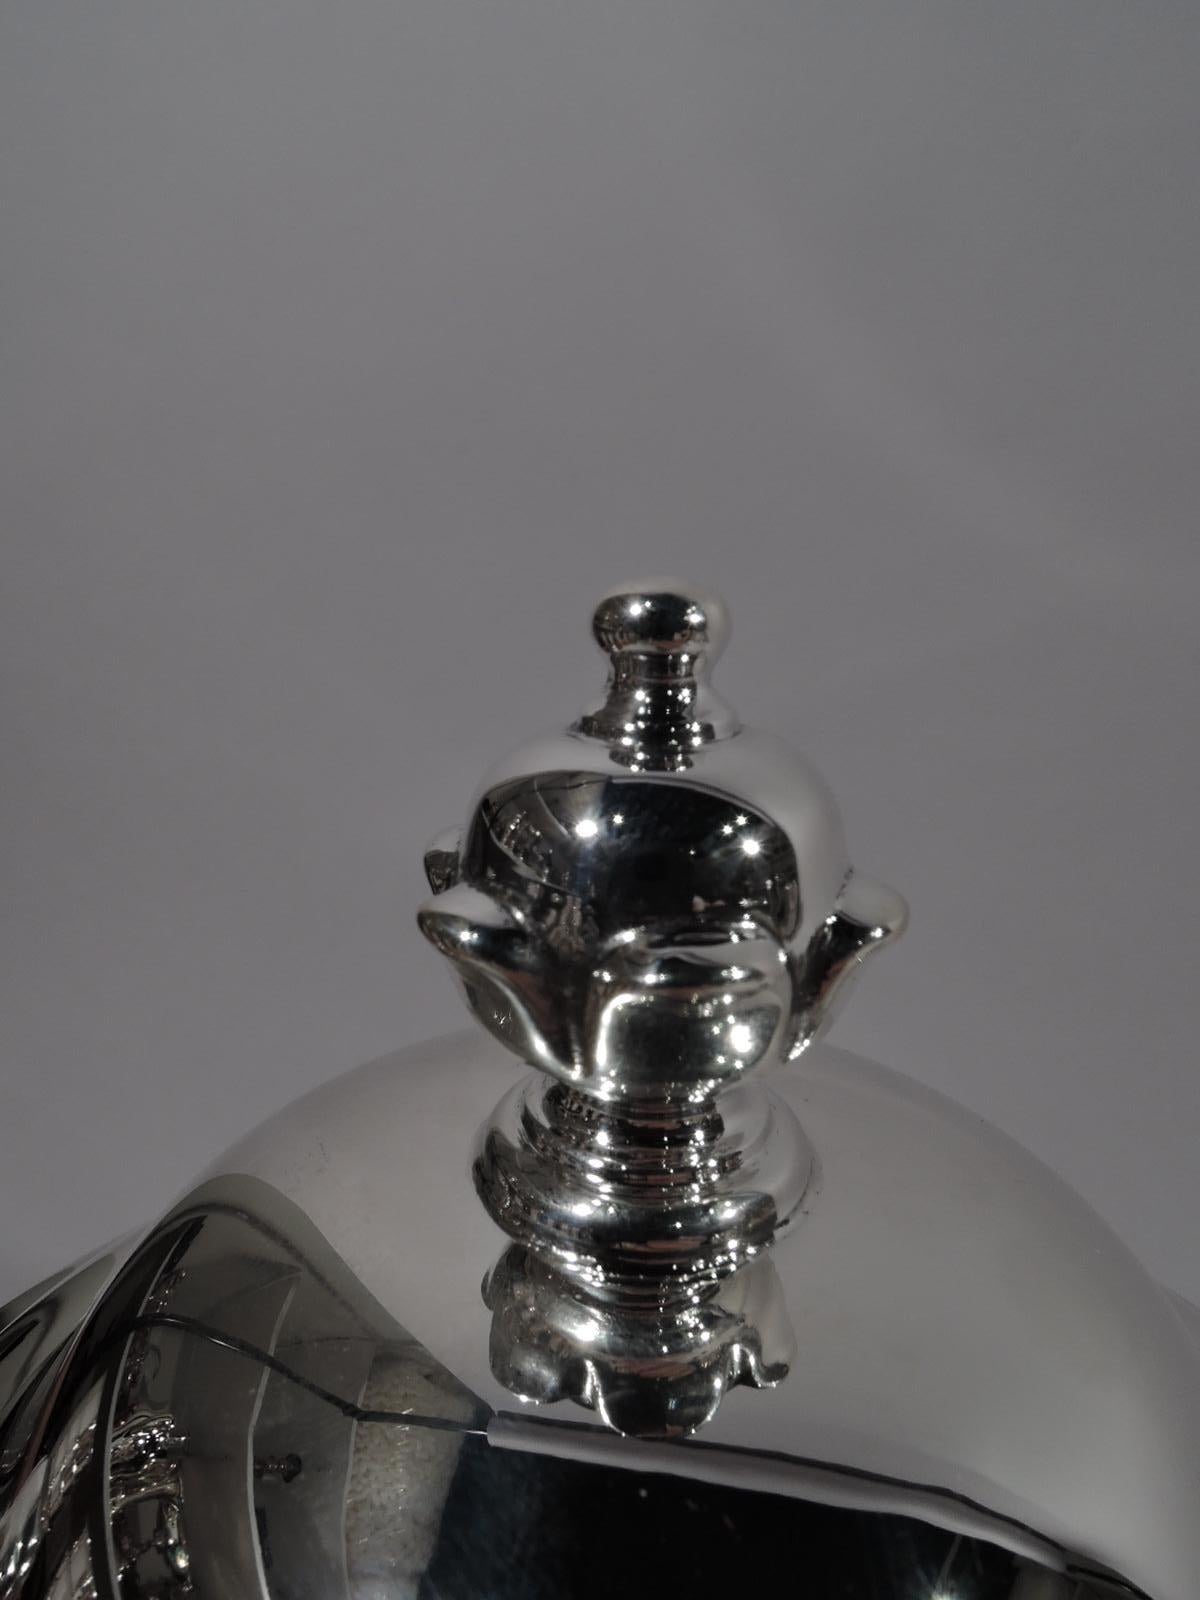 Classical sterling silver covered urn. Flying double-scroll side handles and domed foot. Cover double-domed with bud finial. A traditional trophy with lots of room for engraving. Marked “James Robinson / Sterling / 1”. Weight: 31.5 troy ounces.